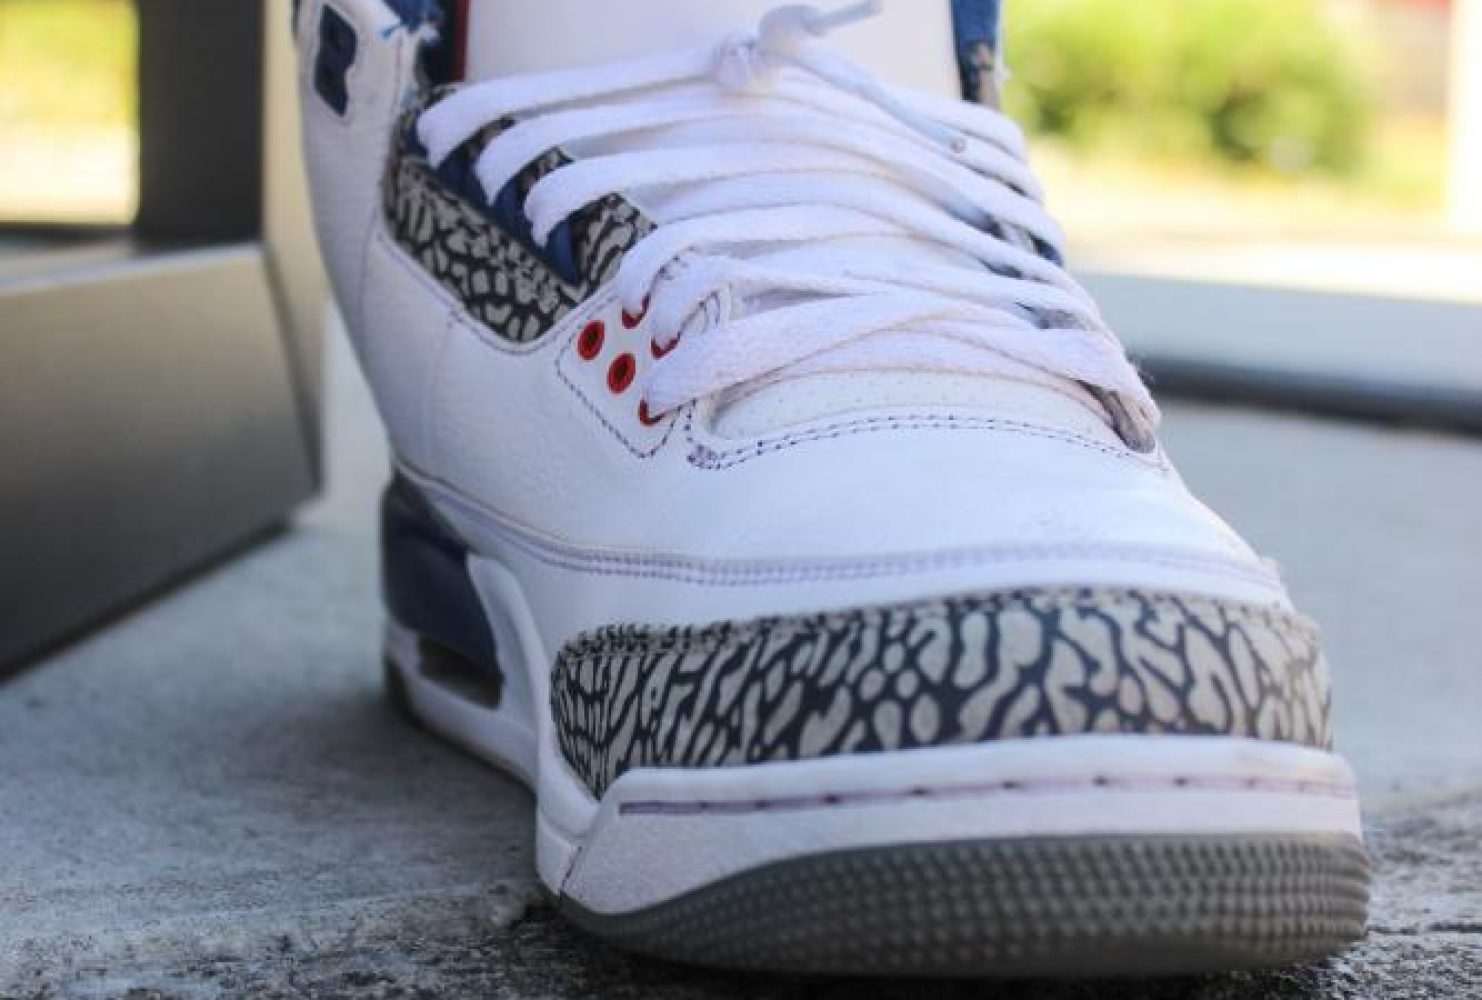 “I was probably in the fourth grade [when I got my first pair of nice shoes], I had the green black and white 1s.” – Cameron Irvin | Criminology | Air Jordan 3 Og “True Blue”(Photo by Felix Oliveros)